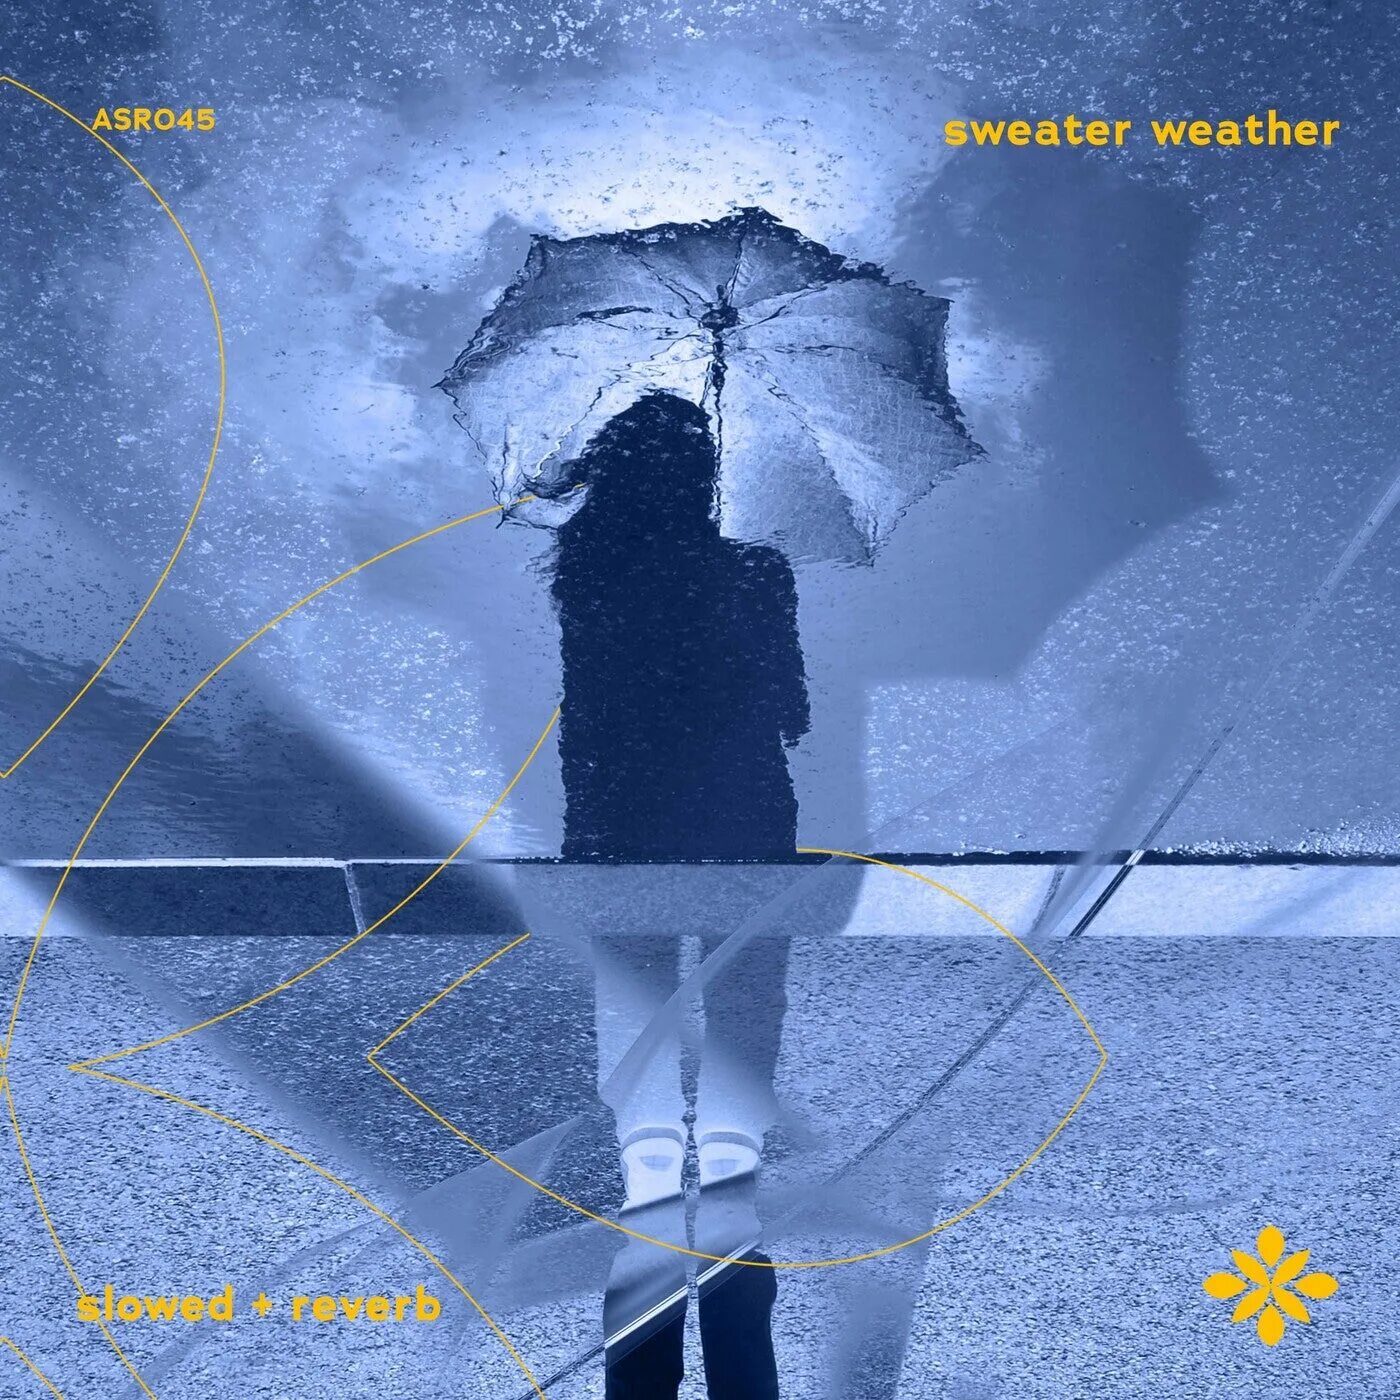 Sweater weather Slowed. Sweater weather - Slowed + Reverb Omgkirby. After Dark Sweater weather Slowed Reverb. After Dark x Sweater weather (Slowed + Reverb). Песня after dark slowed reverb